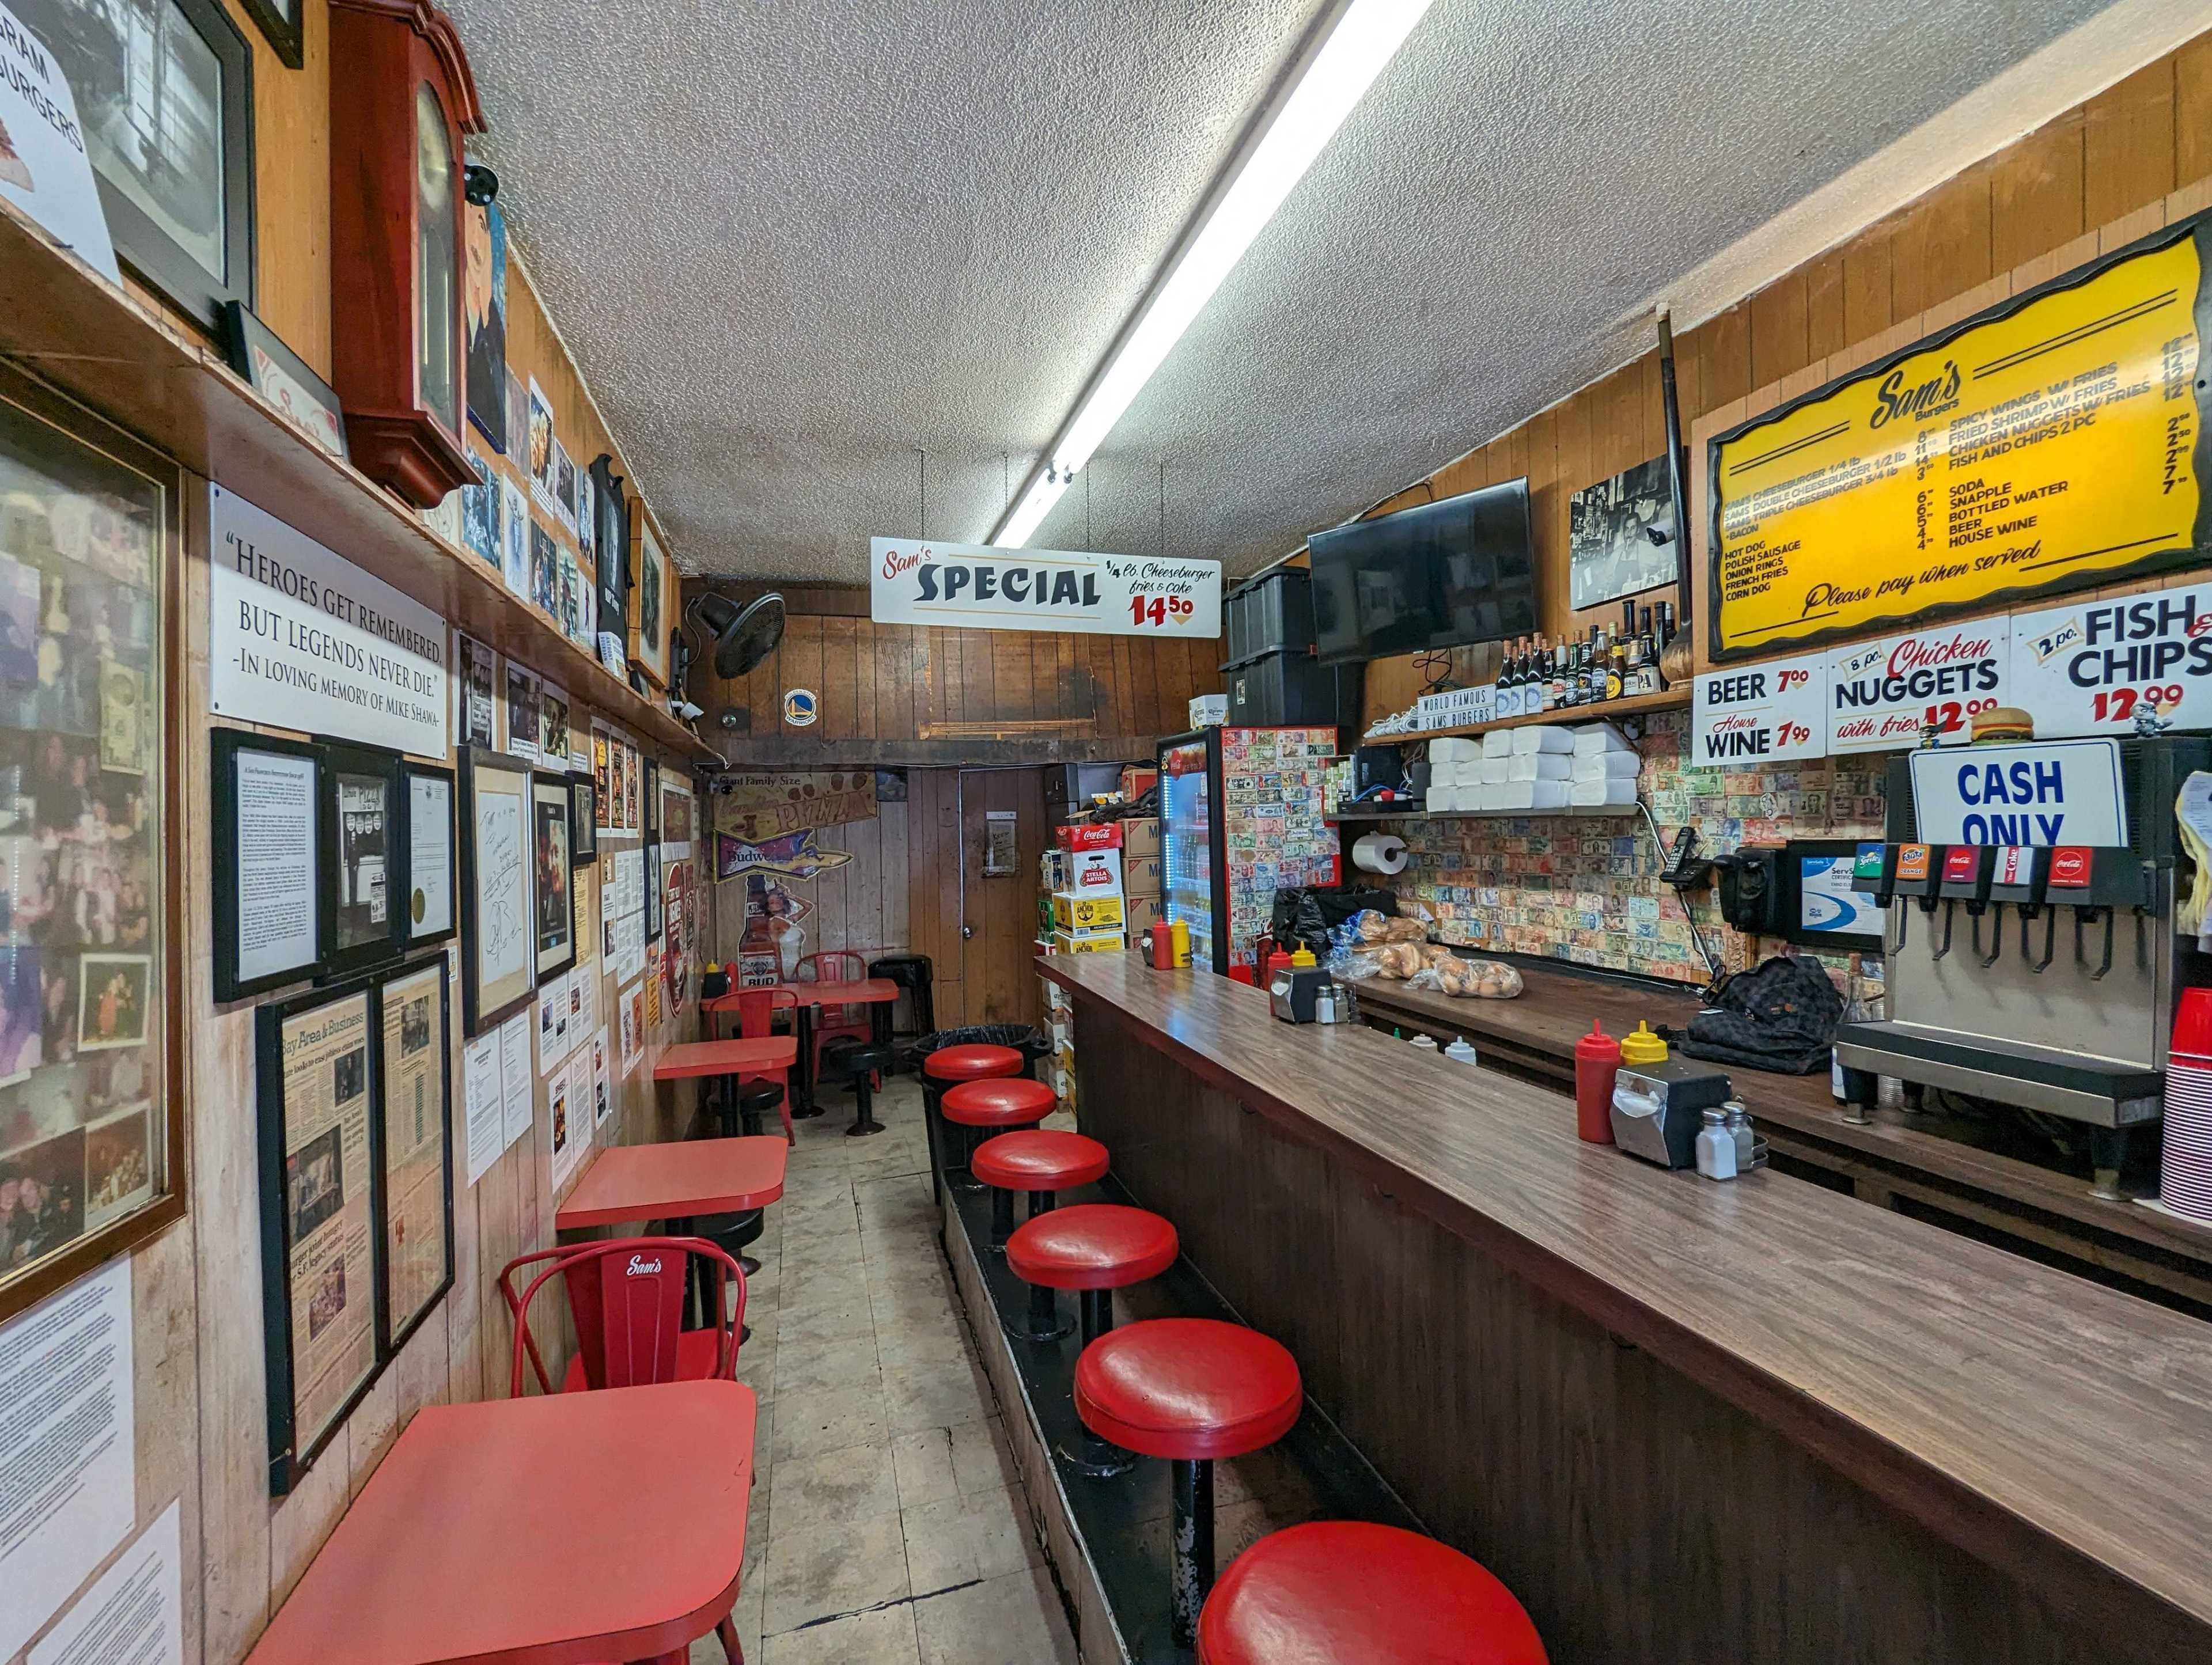 The interior of Sam's Burgers features signs and a long wall lined with old-school menu prices, clippings and memorabilia at its Broadway address in San Francisco's North Beach neighborhood.